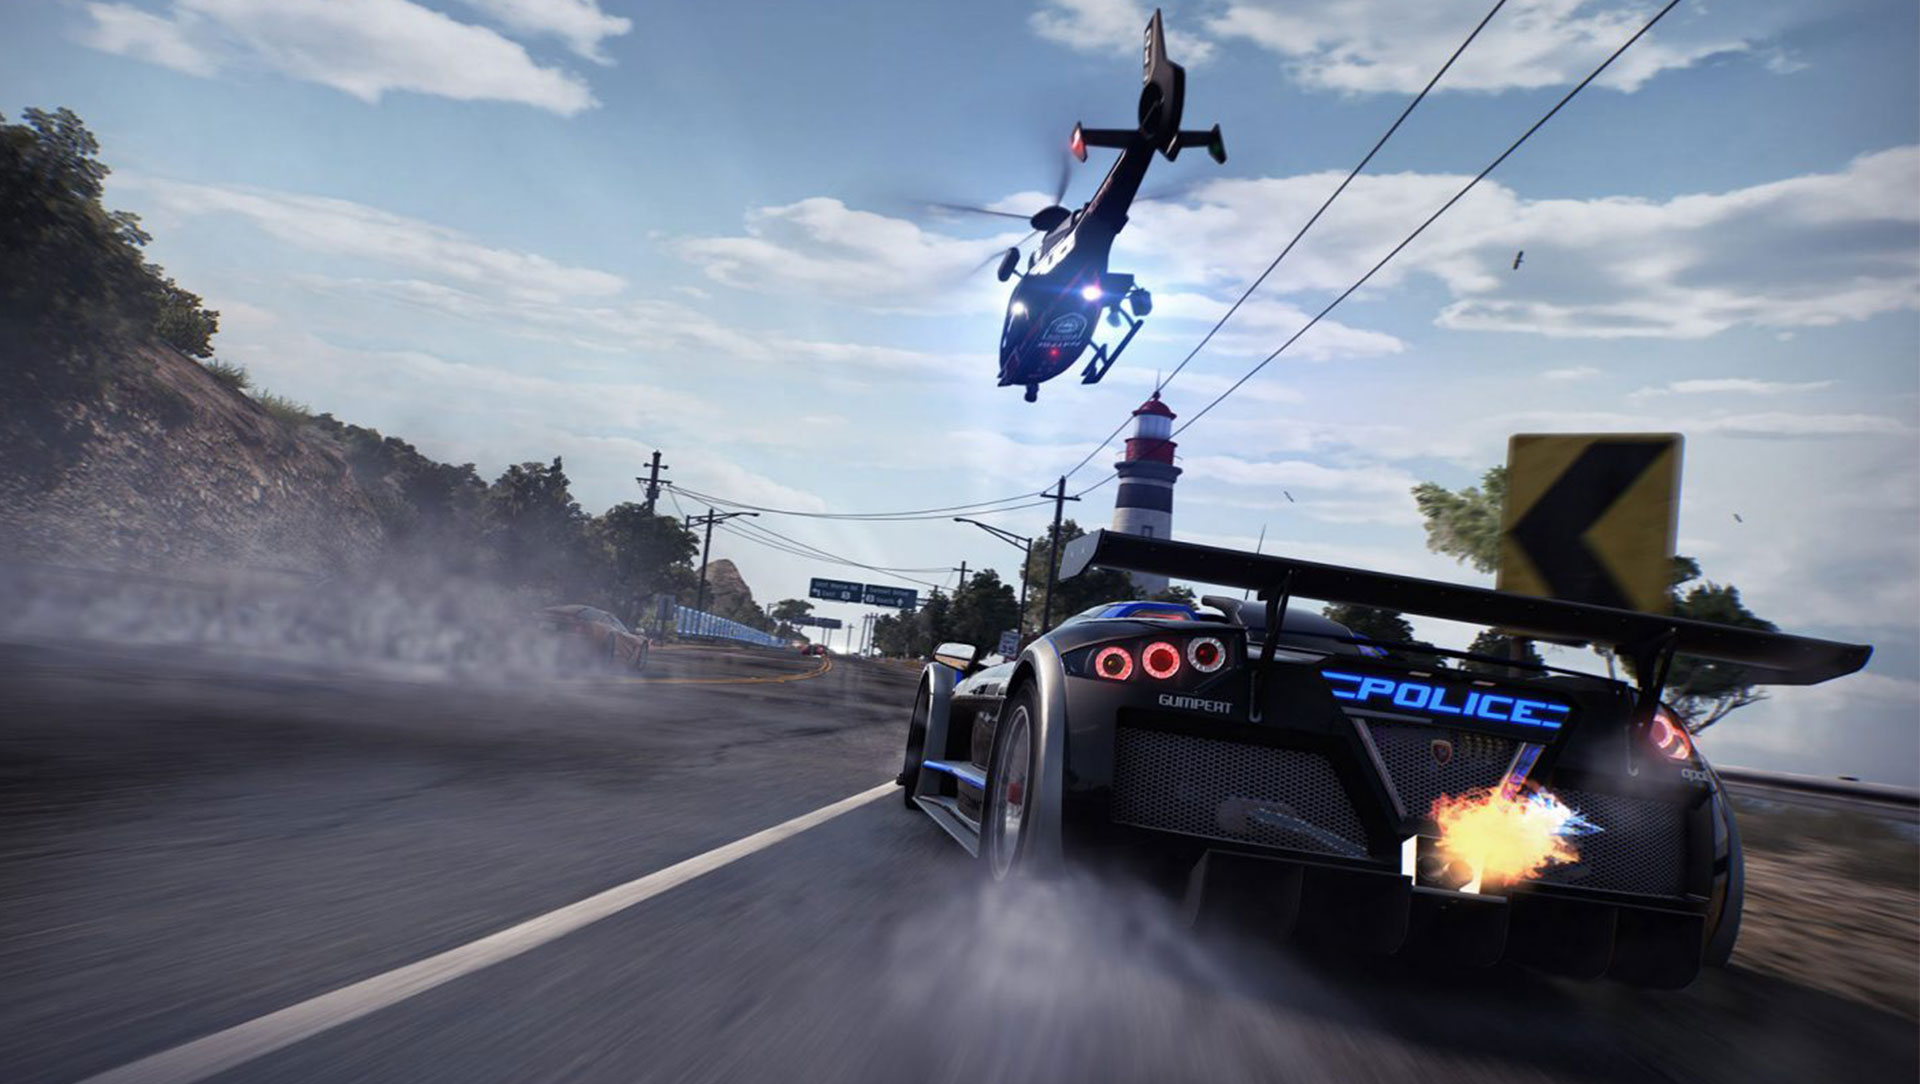 Hot pursuit nintendo. Need for Speed hot Pursuit ремастер. Need for Speed hot Pursuit Remastered ps4. Need for Speed hot Pursuit Remastered 2020. NFS hot Pursuit Remastered 2020.